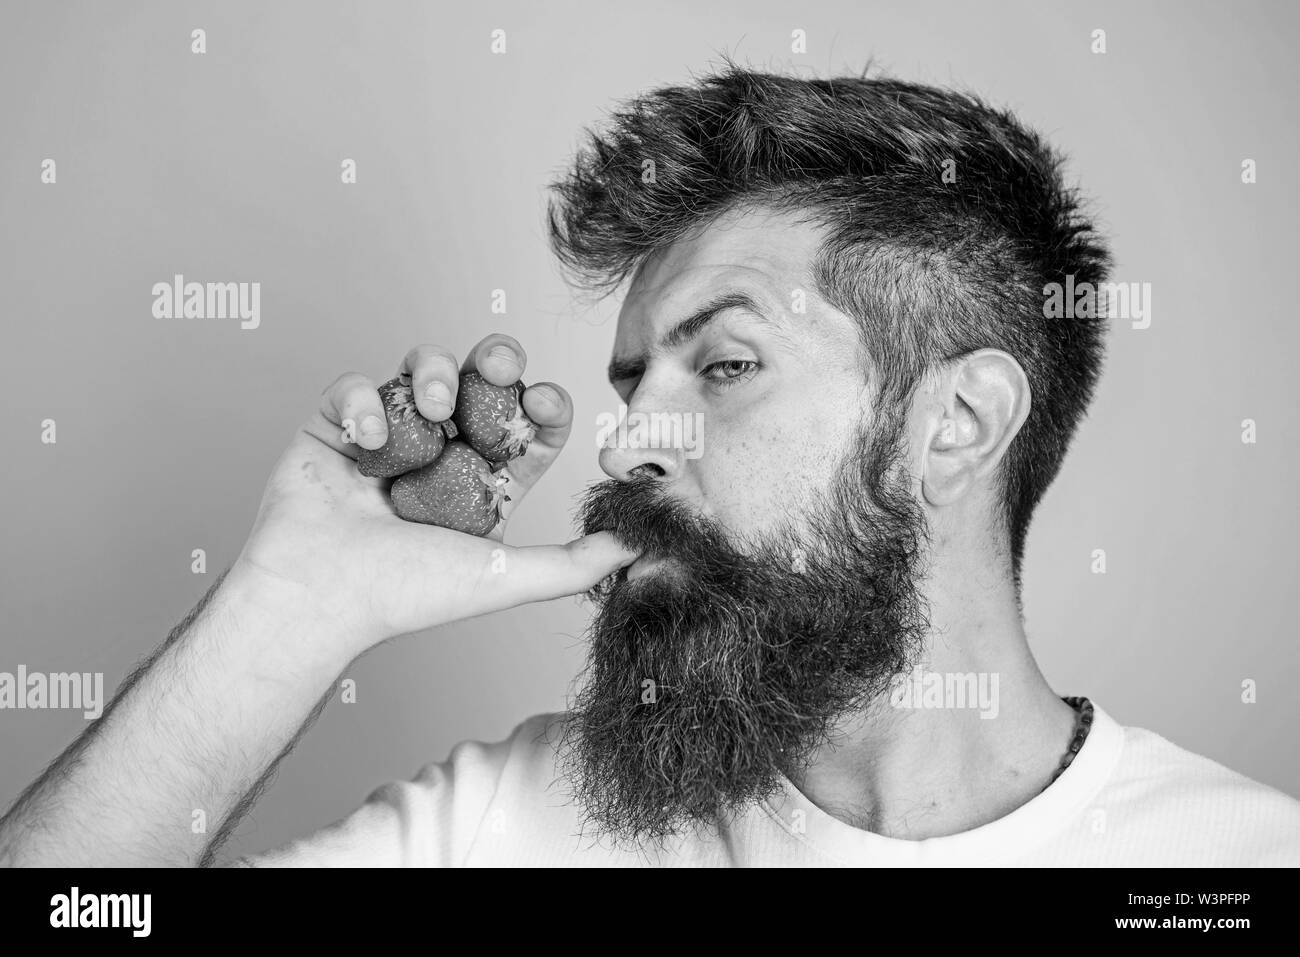 Hipster bearded holds strawberries fist as juice bottle. Man drinks strawberry juice suck thumb as drink straw blue background. Man strict face enjoy fresh drink strawberry juice. Fresh juice concept. Stock Photo